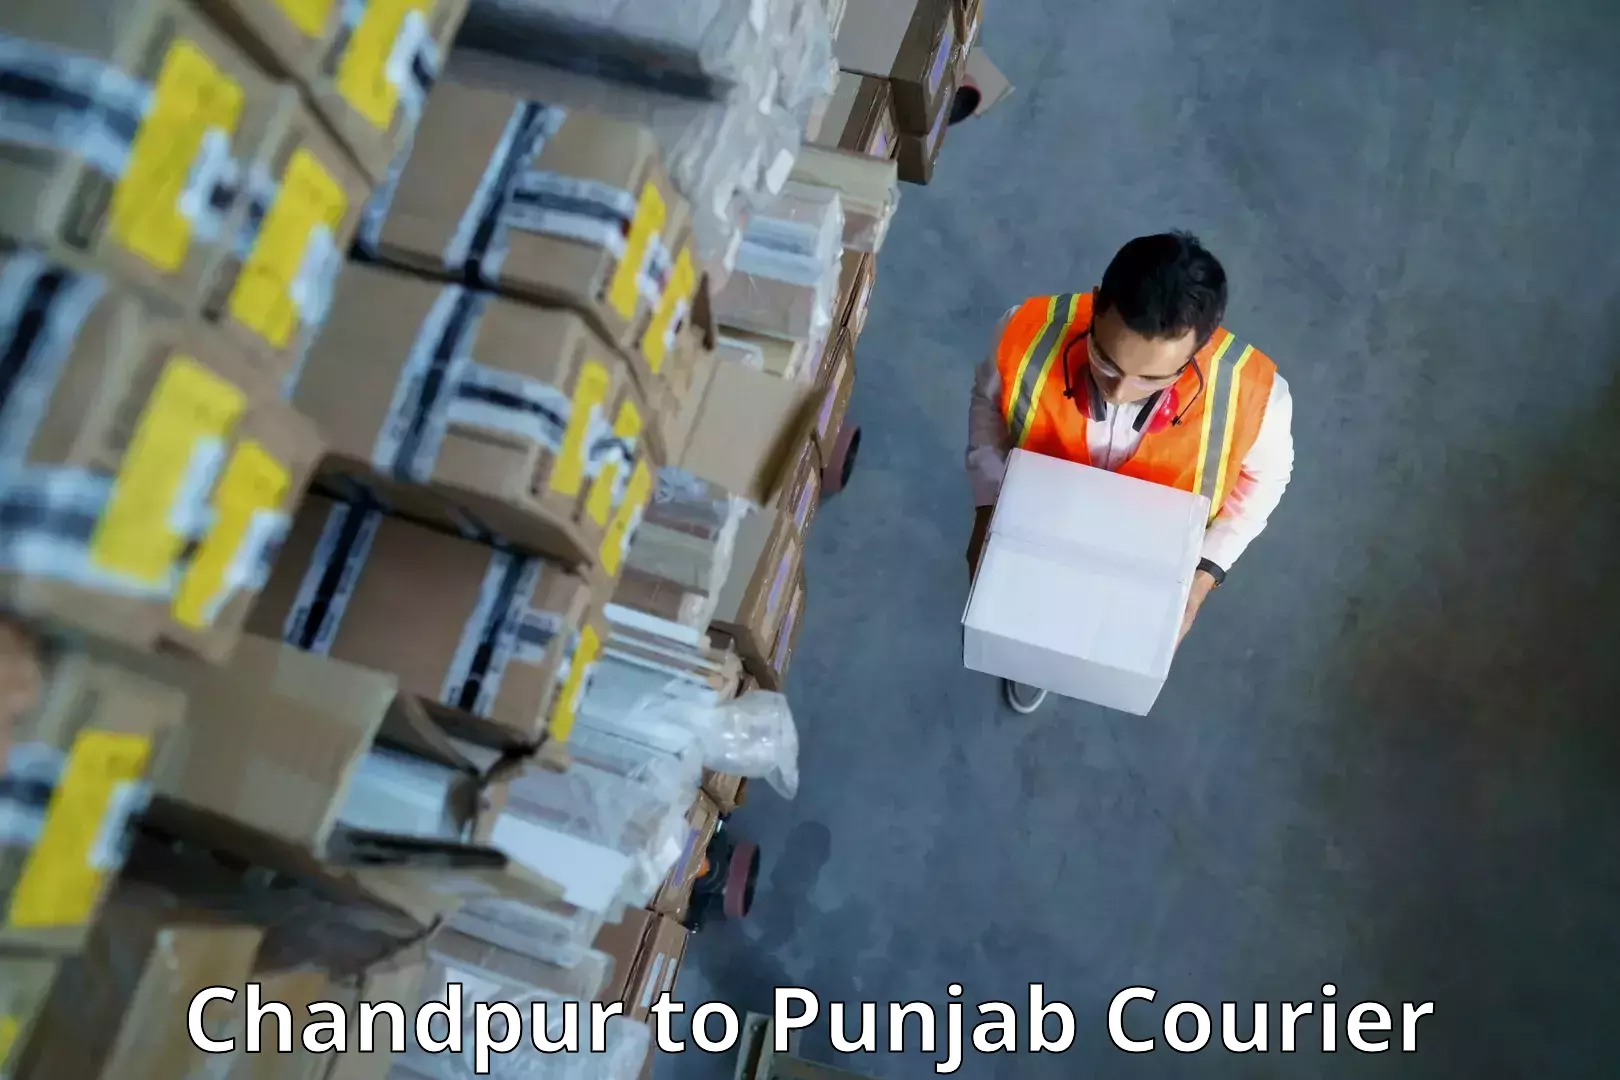 On-call courier service Chandpur to Dhuri